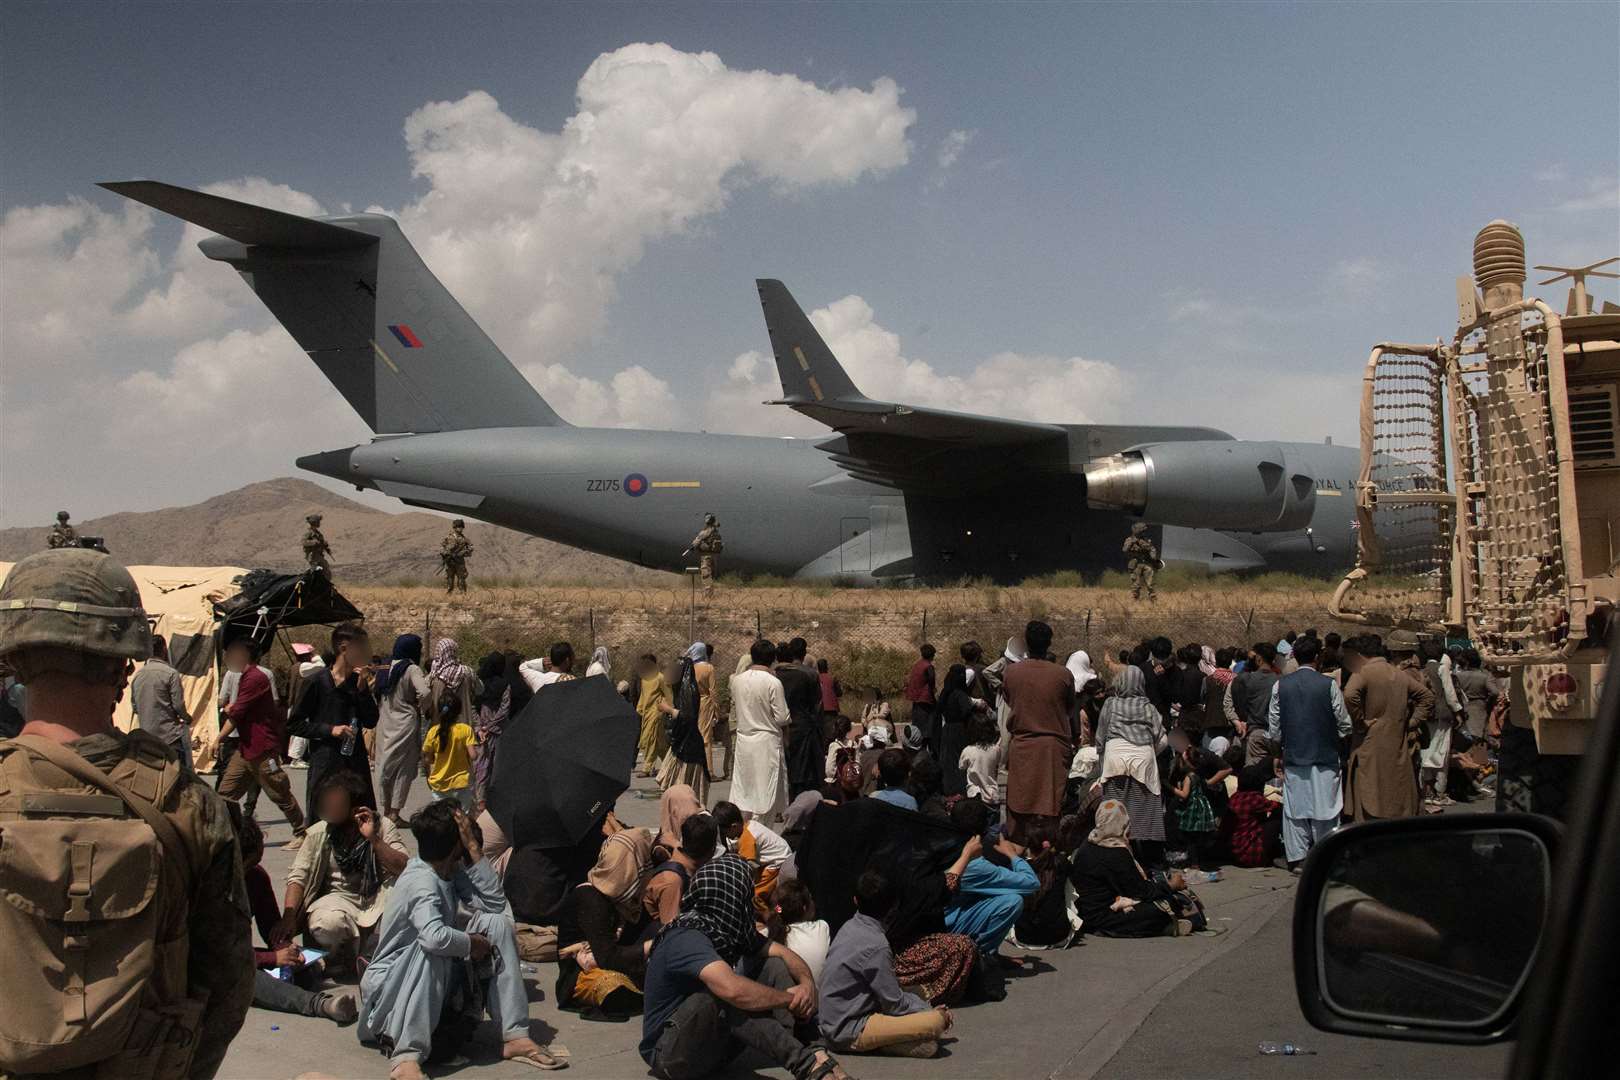 Operation Pitting saw 15,000 people brought from Afghanistan to the UK in 2021 (Ben Shread/MoD/Crown Copyright/PA)